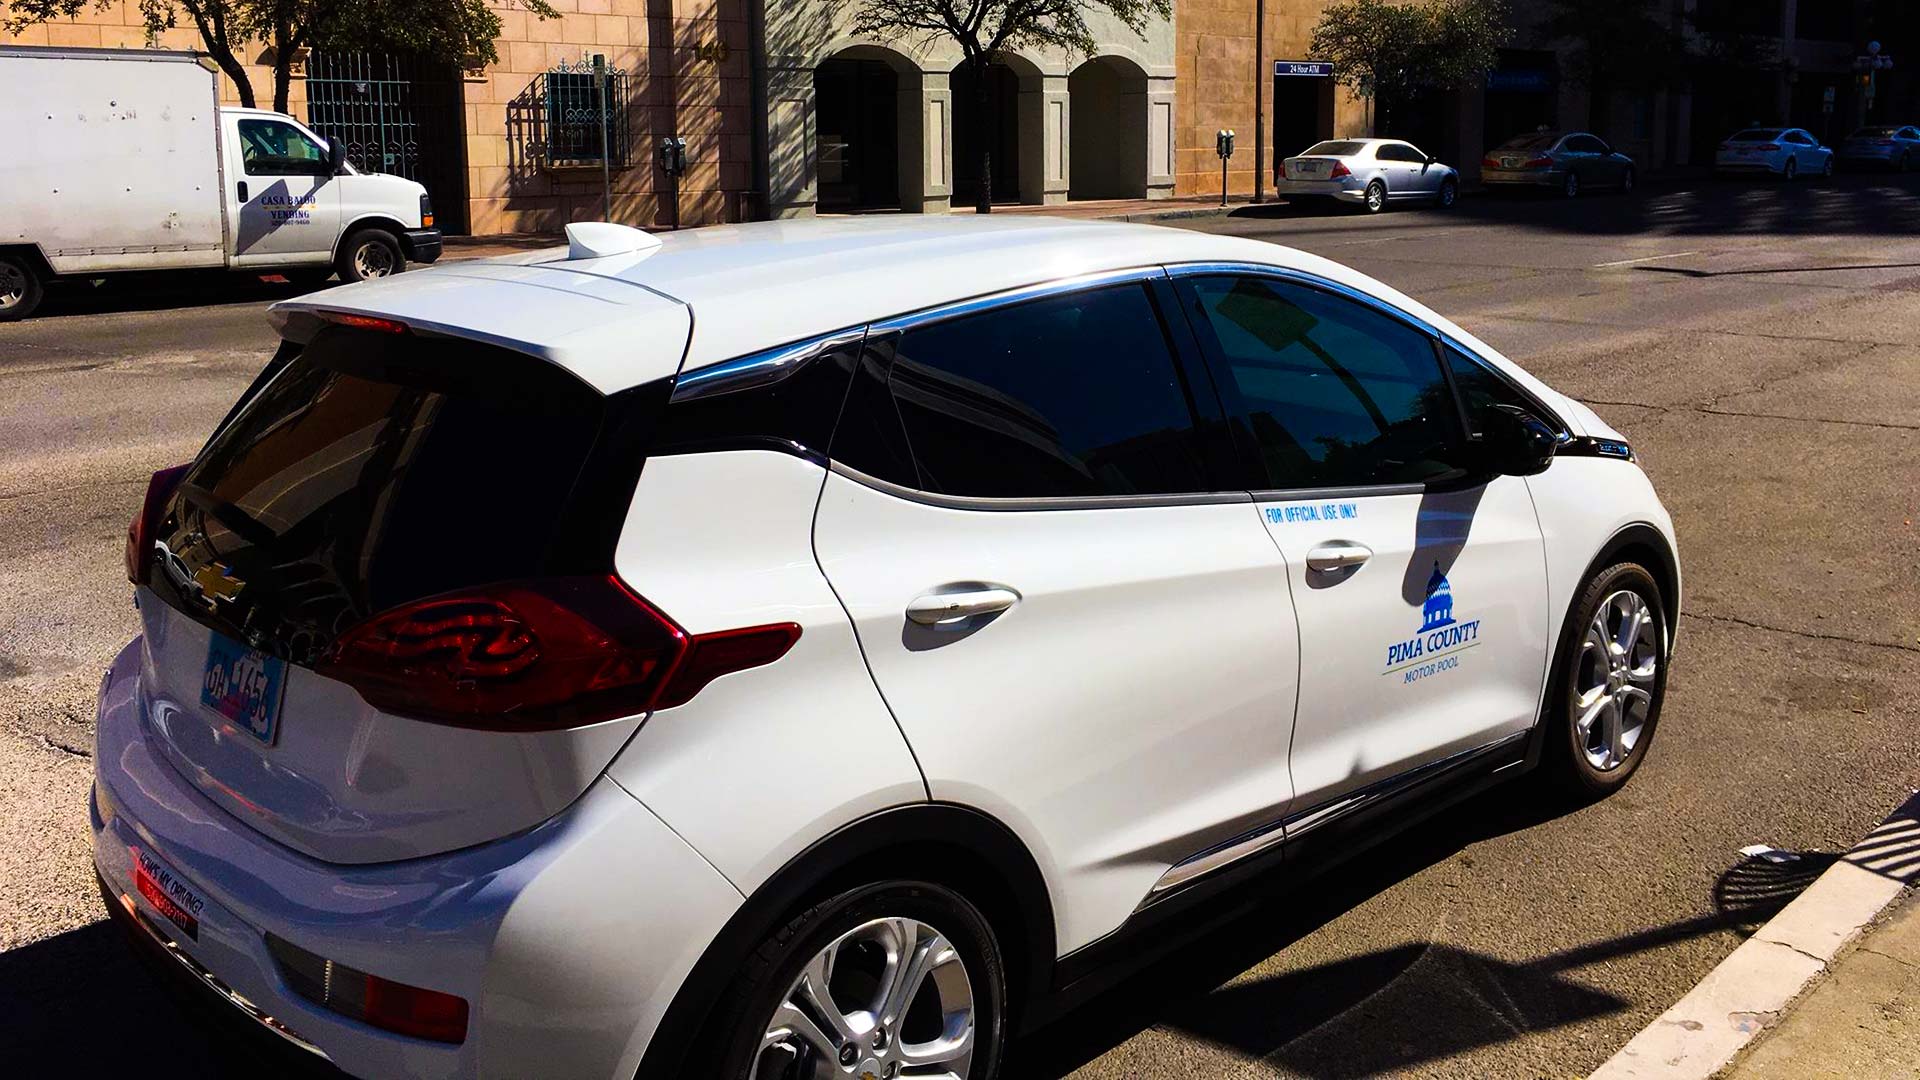 One of the electric vehicles in the Pima County fleet. The county plans to convert 10 percent of its fleet to EVs by 2025.